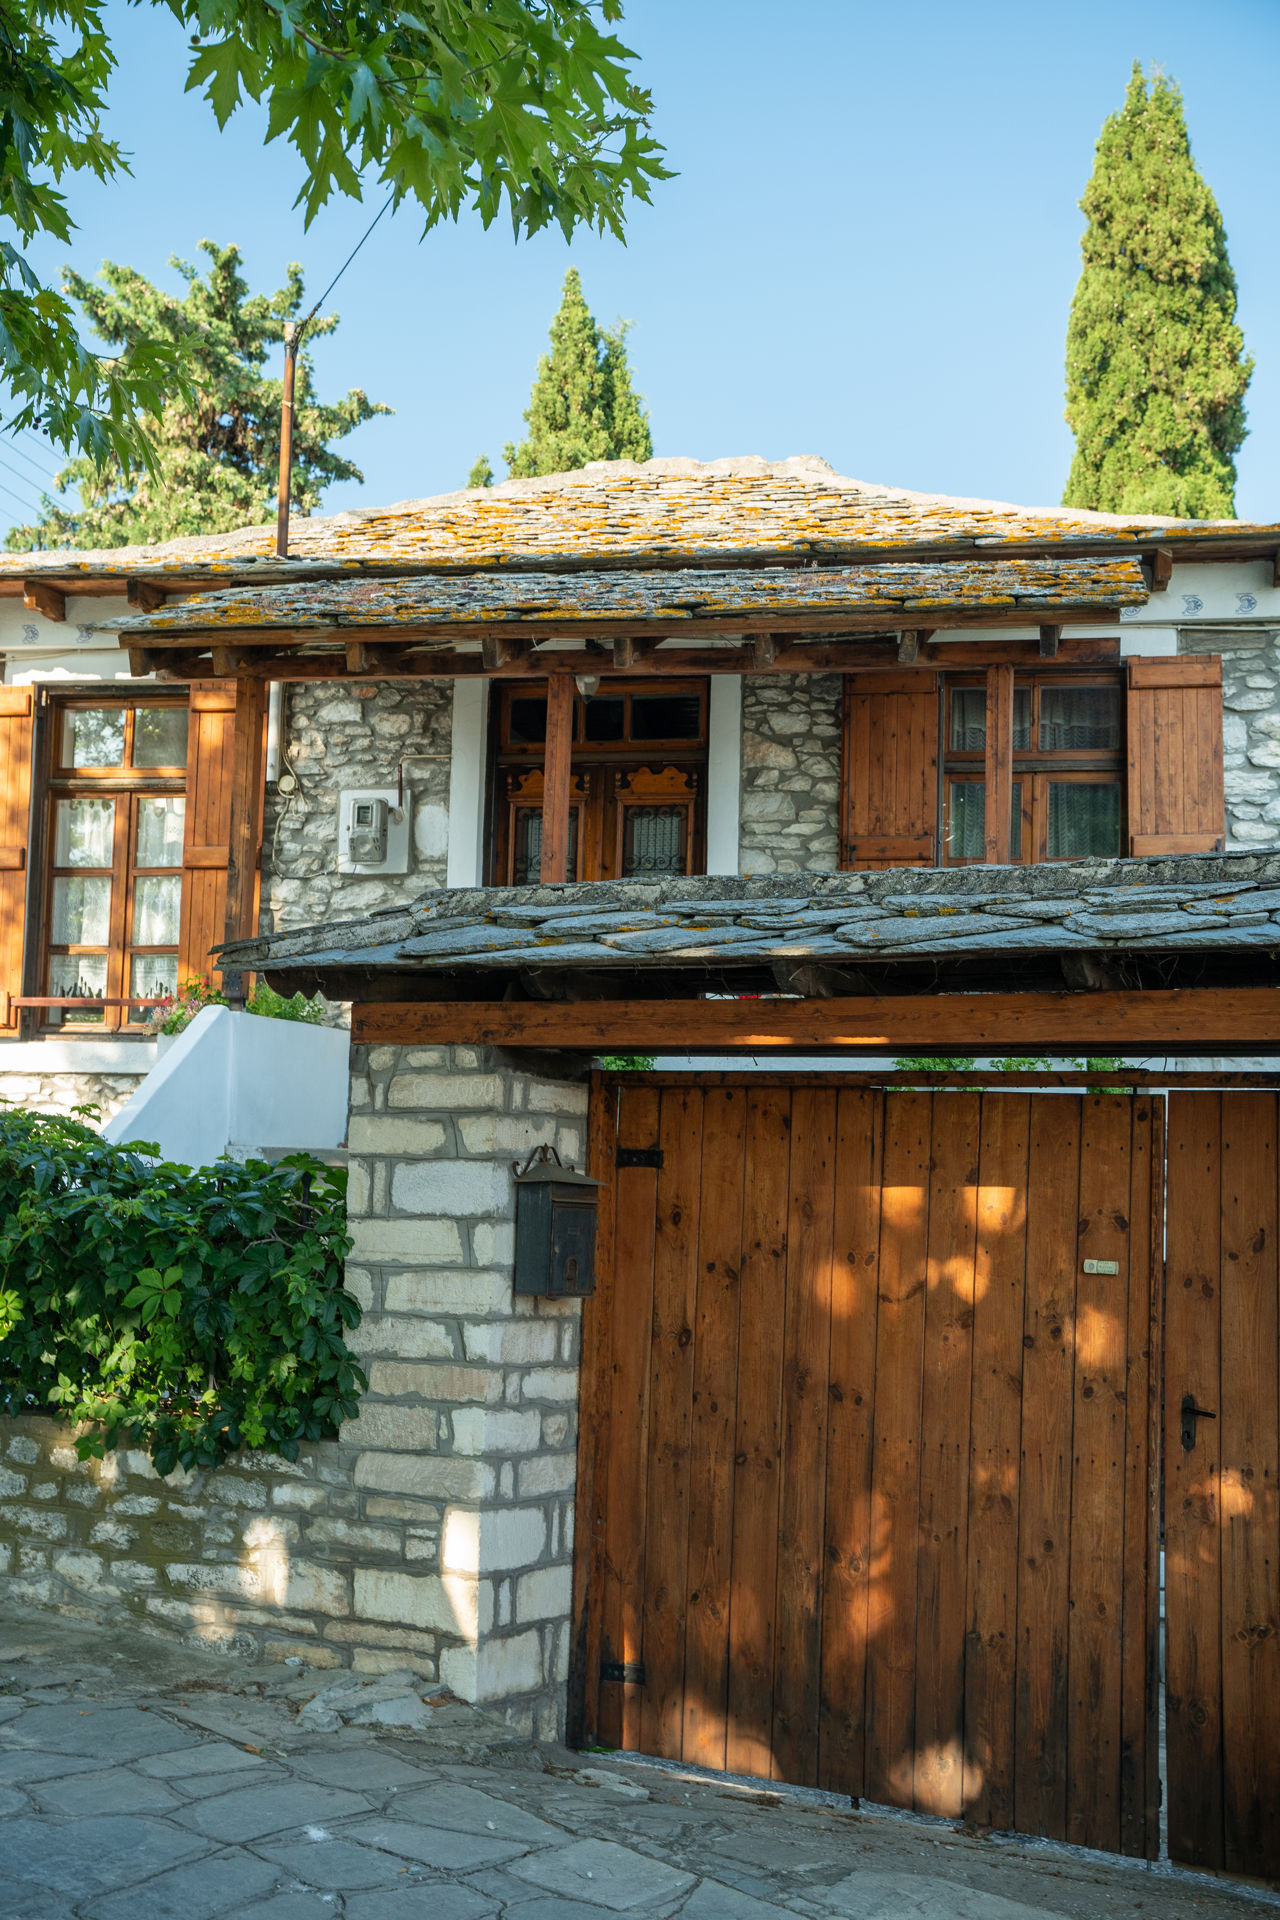 Theologos Village is full of authentic touches such as Macedonian architecture, watermills and little wooden bridges